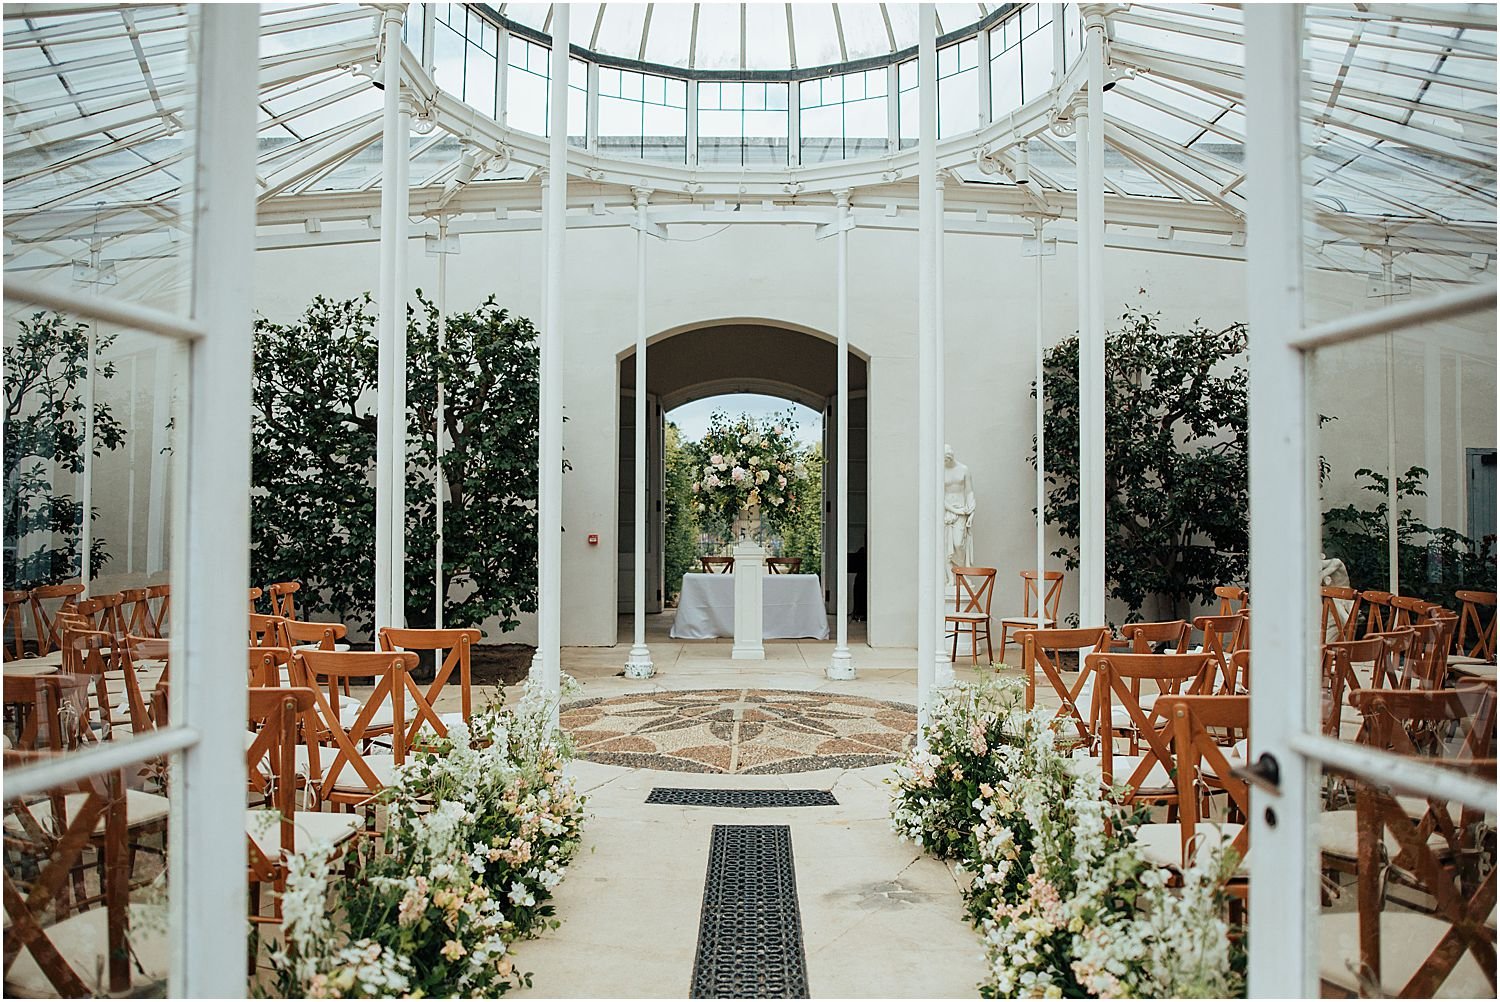 Chiswick House and Gardens Conservatory wedding